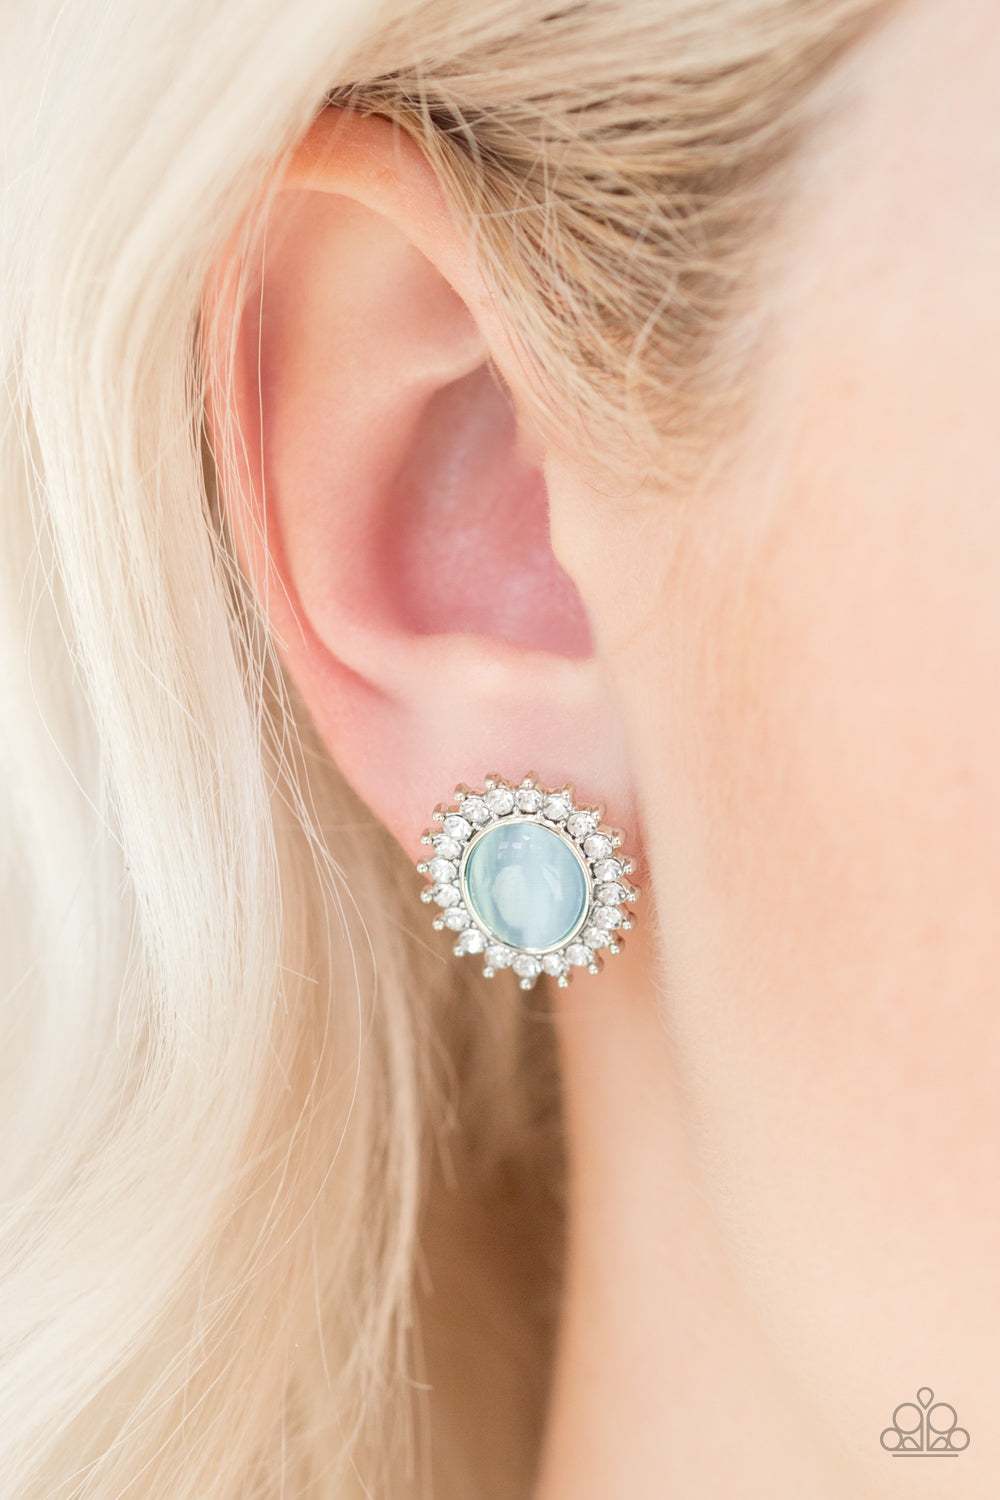 Hey There, Gorgeous - Blue Moonstone and White Rhinestone Stud Earrings - Paparazzi Accessories - All That Sparkles XOXO